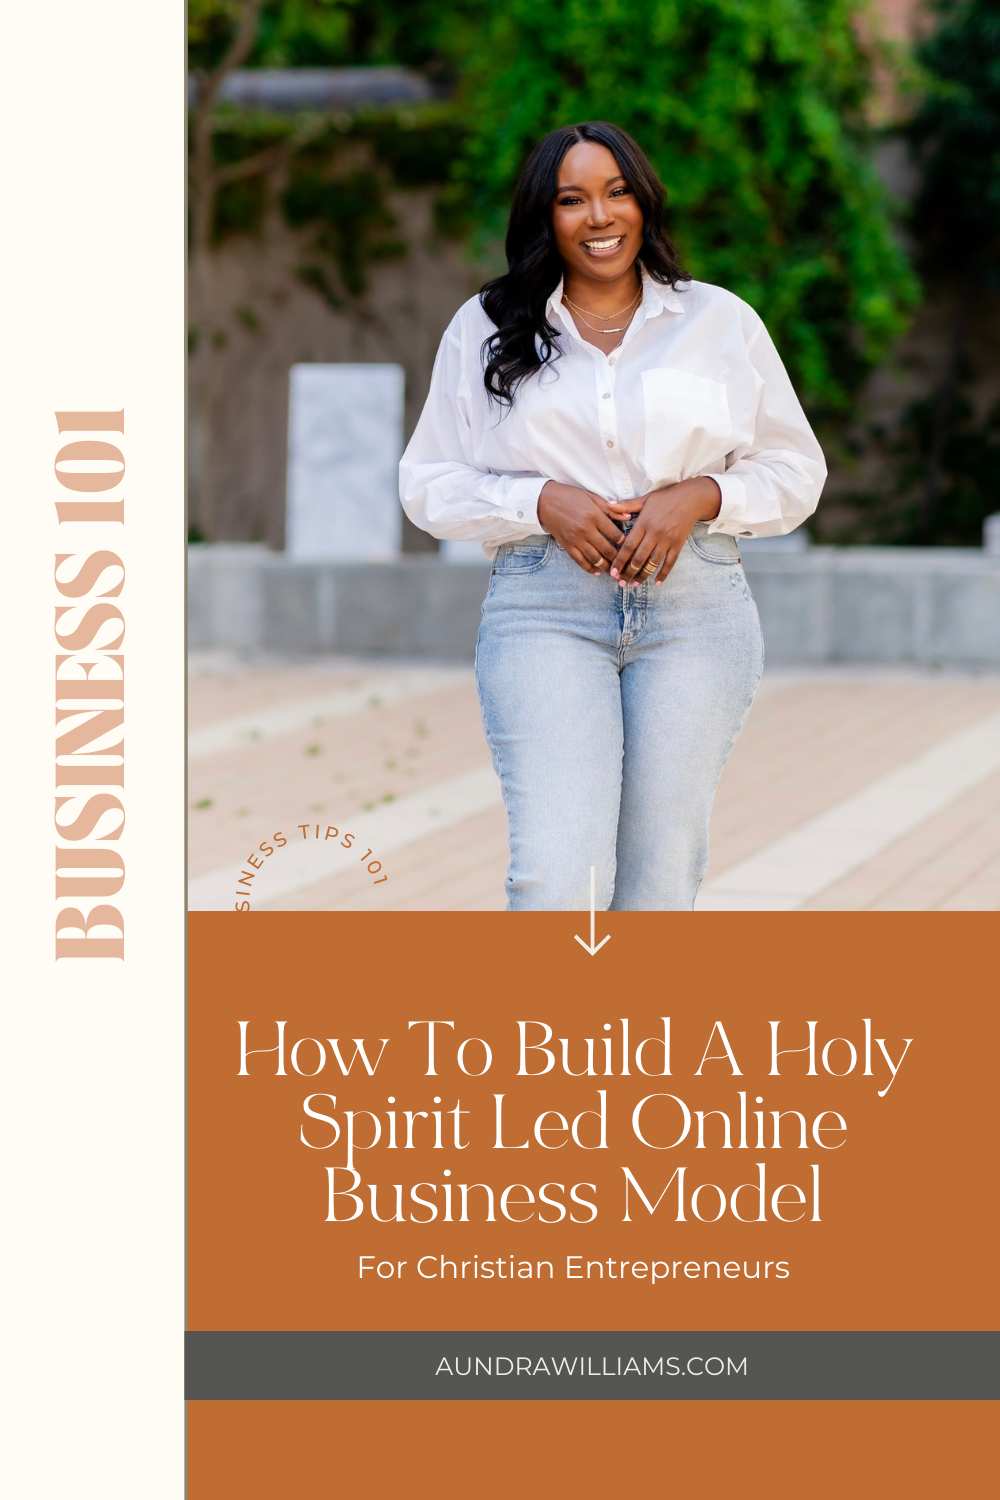 How To Build A Holy Spirit Led Online Business Model- Aundra Williams